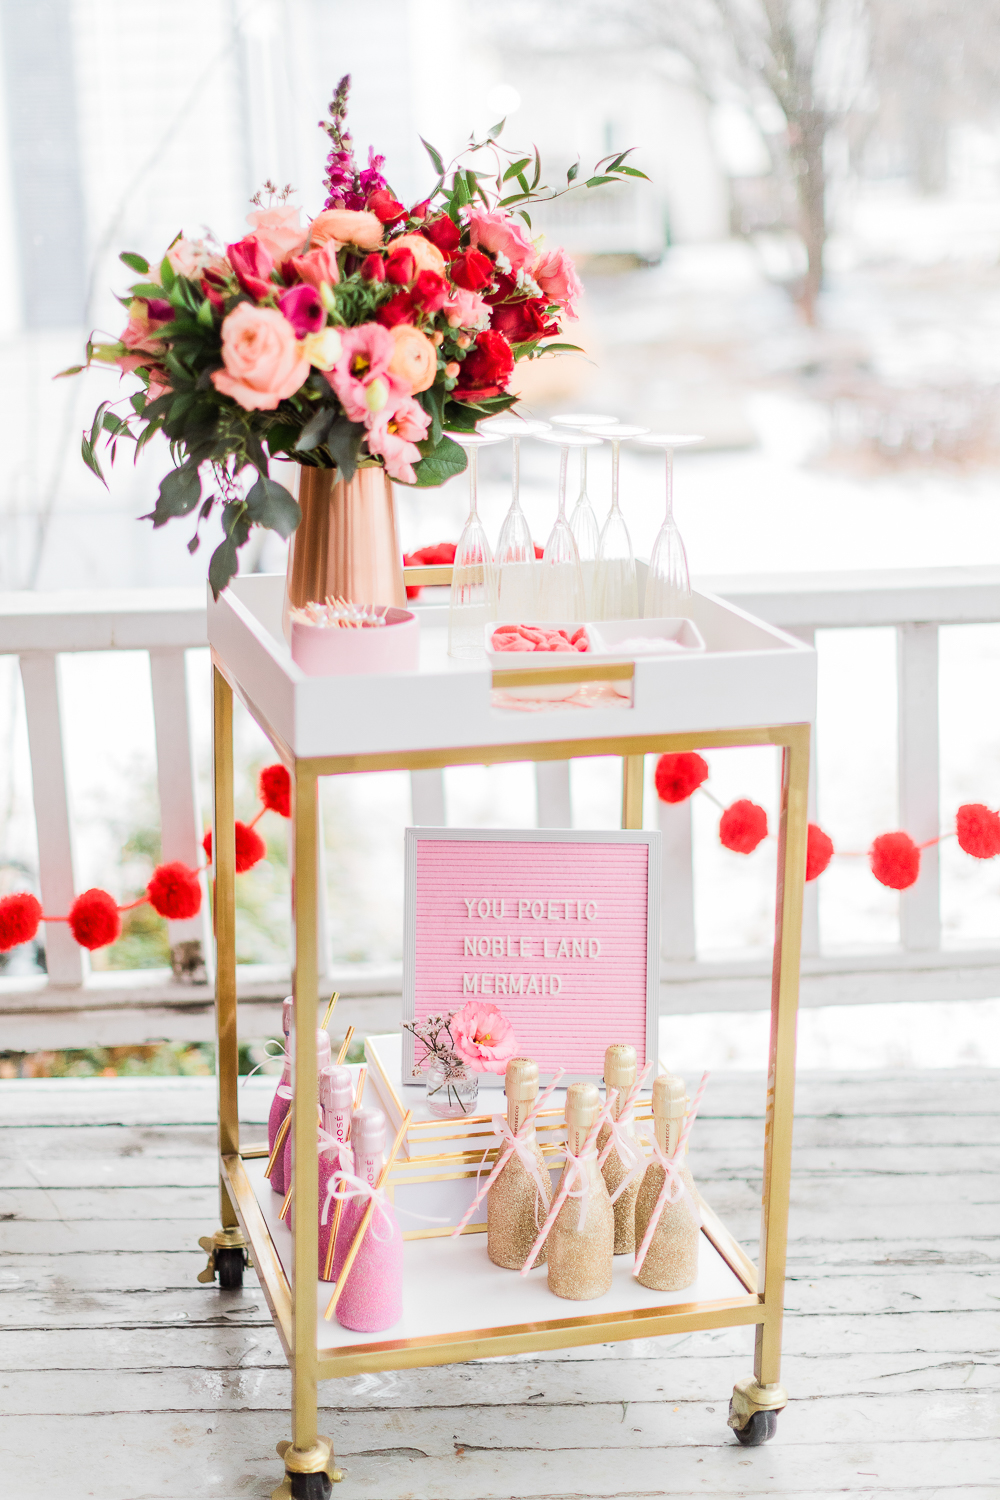 Galentines Day Bar Cart, Galentines letter board ideas, popular entertaining blog Diary of a Debutante, popular entertaining blogger Stephanie Ziajka